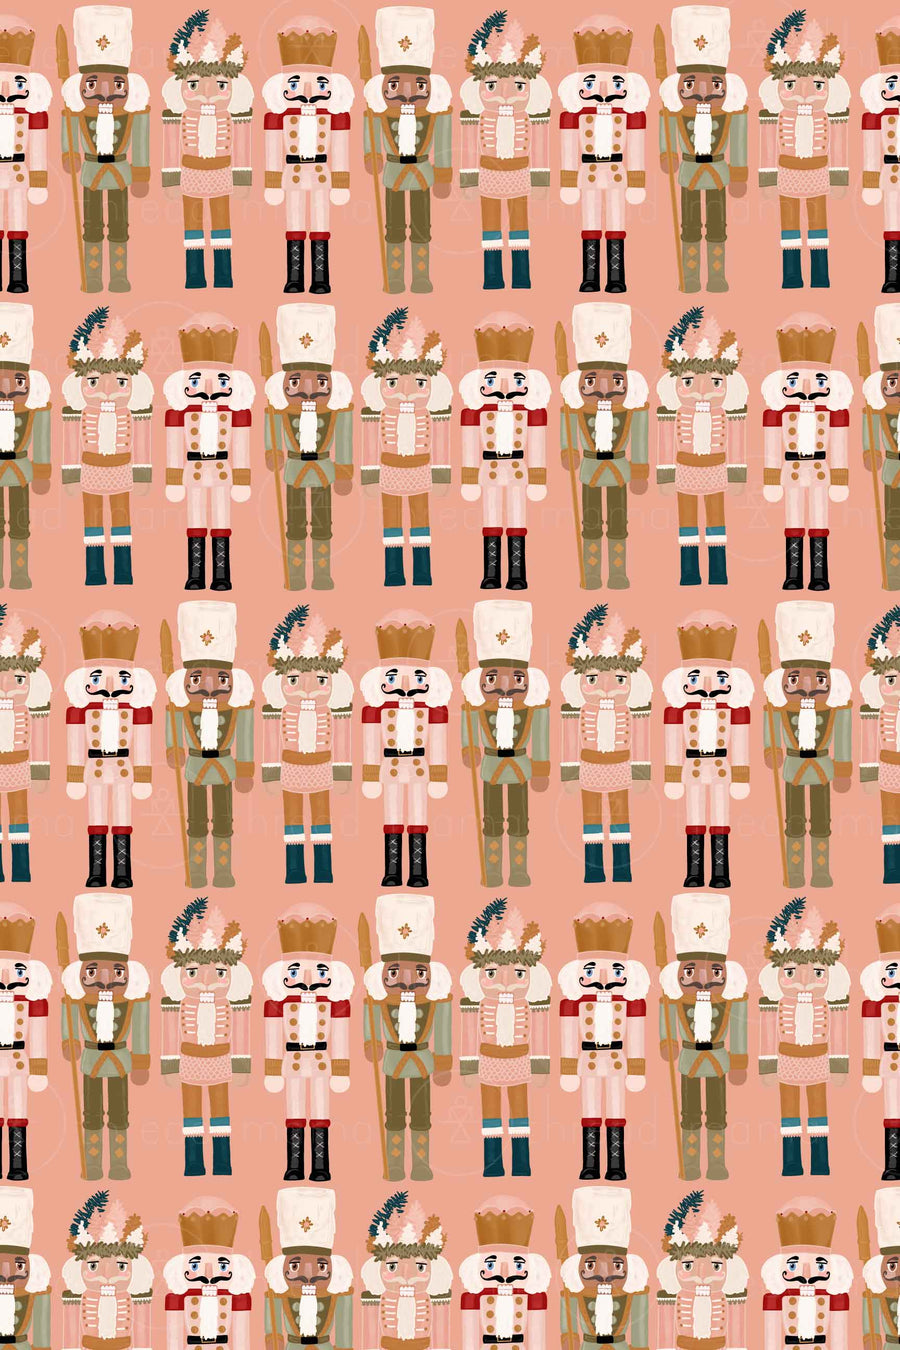 Repeating Pattern #25 (Seamless)